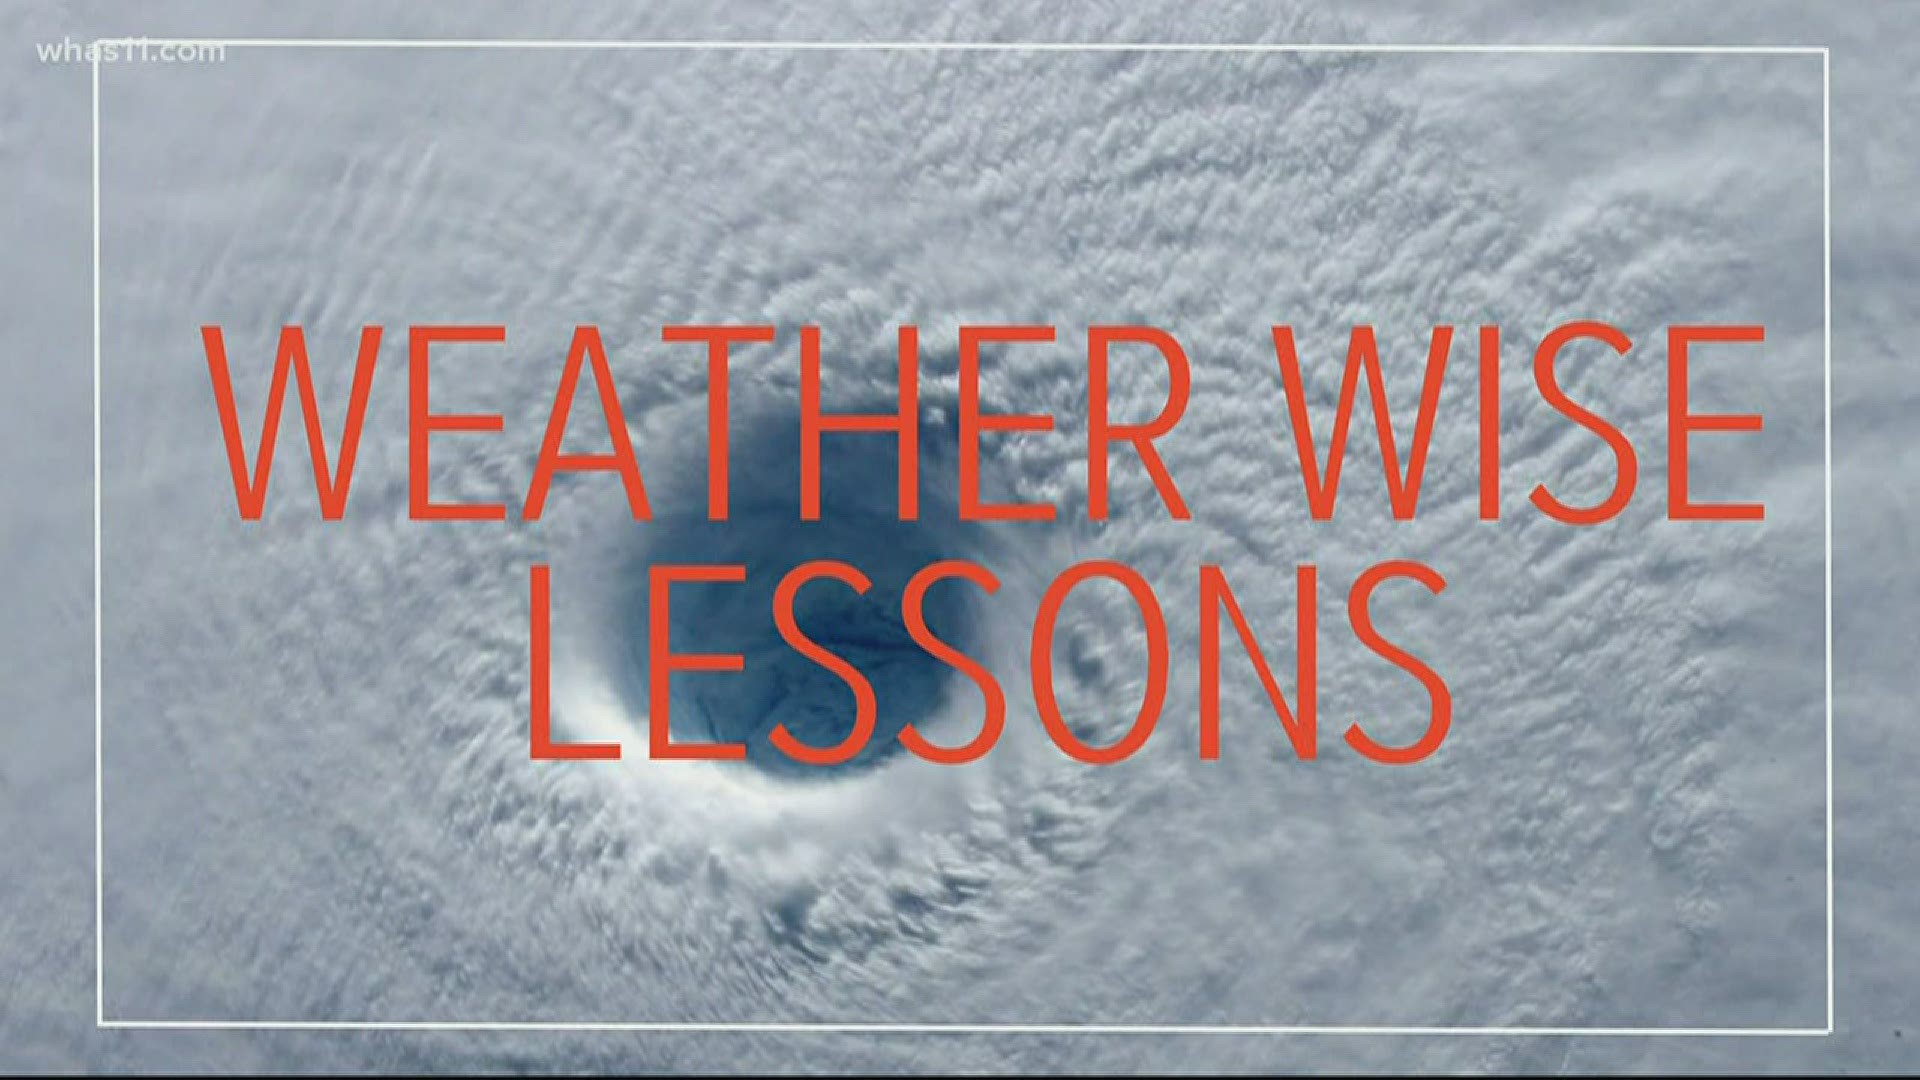 There are several different types of tropical weather systems – known broadly as tropical cyclones. Here are five common definitions of a tropical system from birth